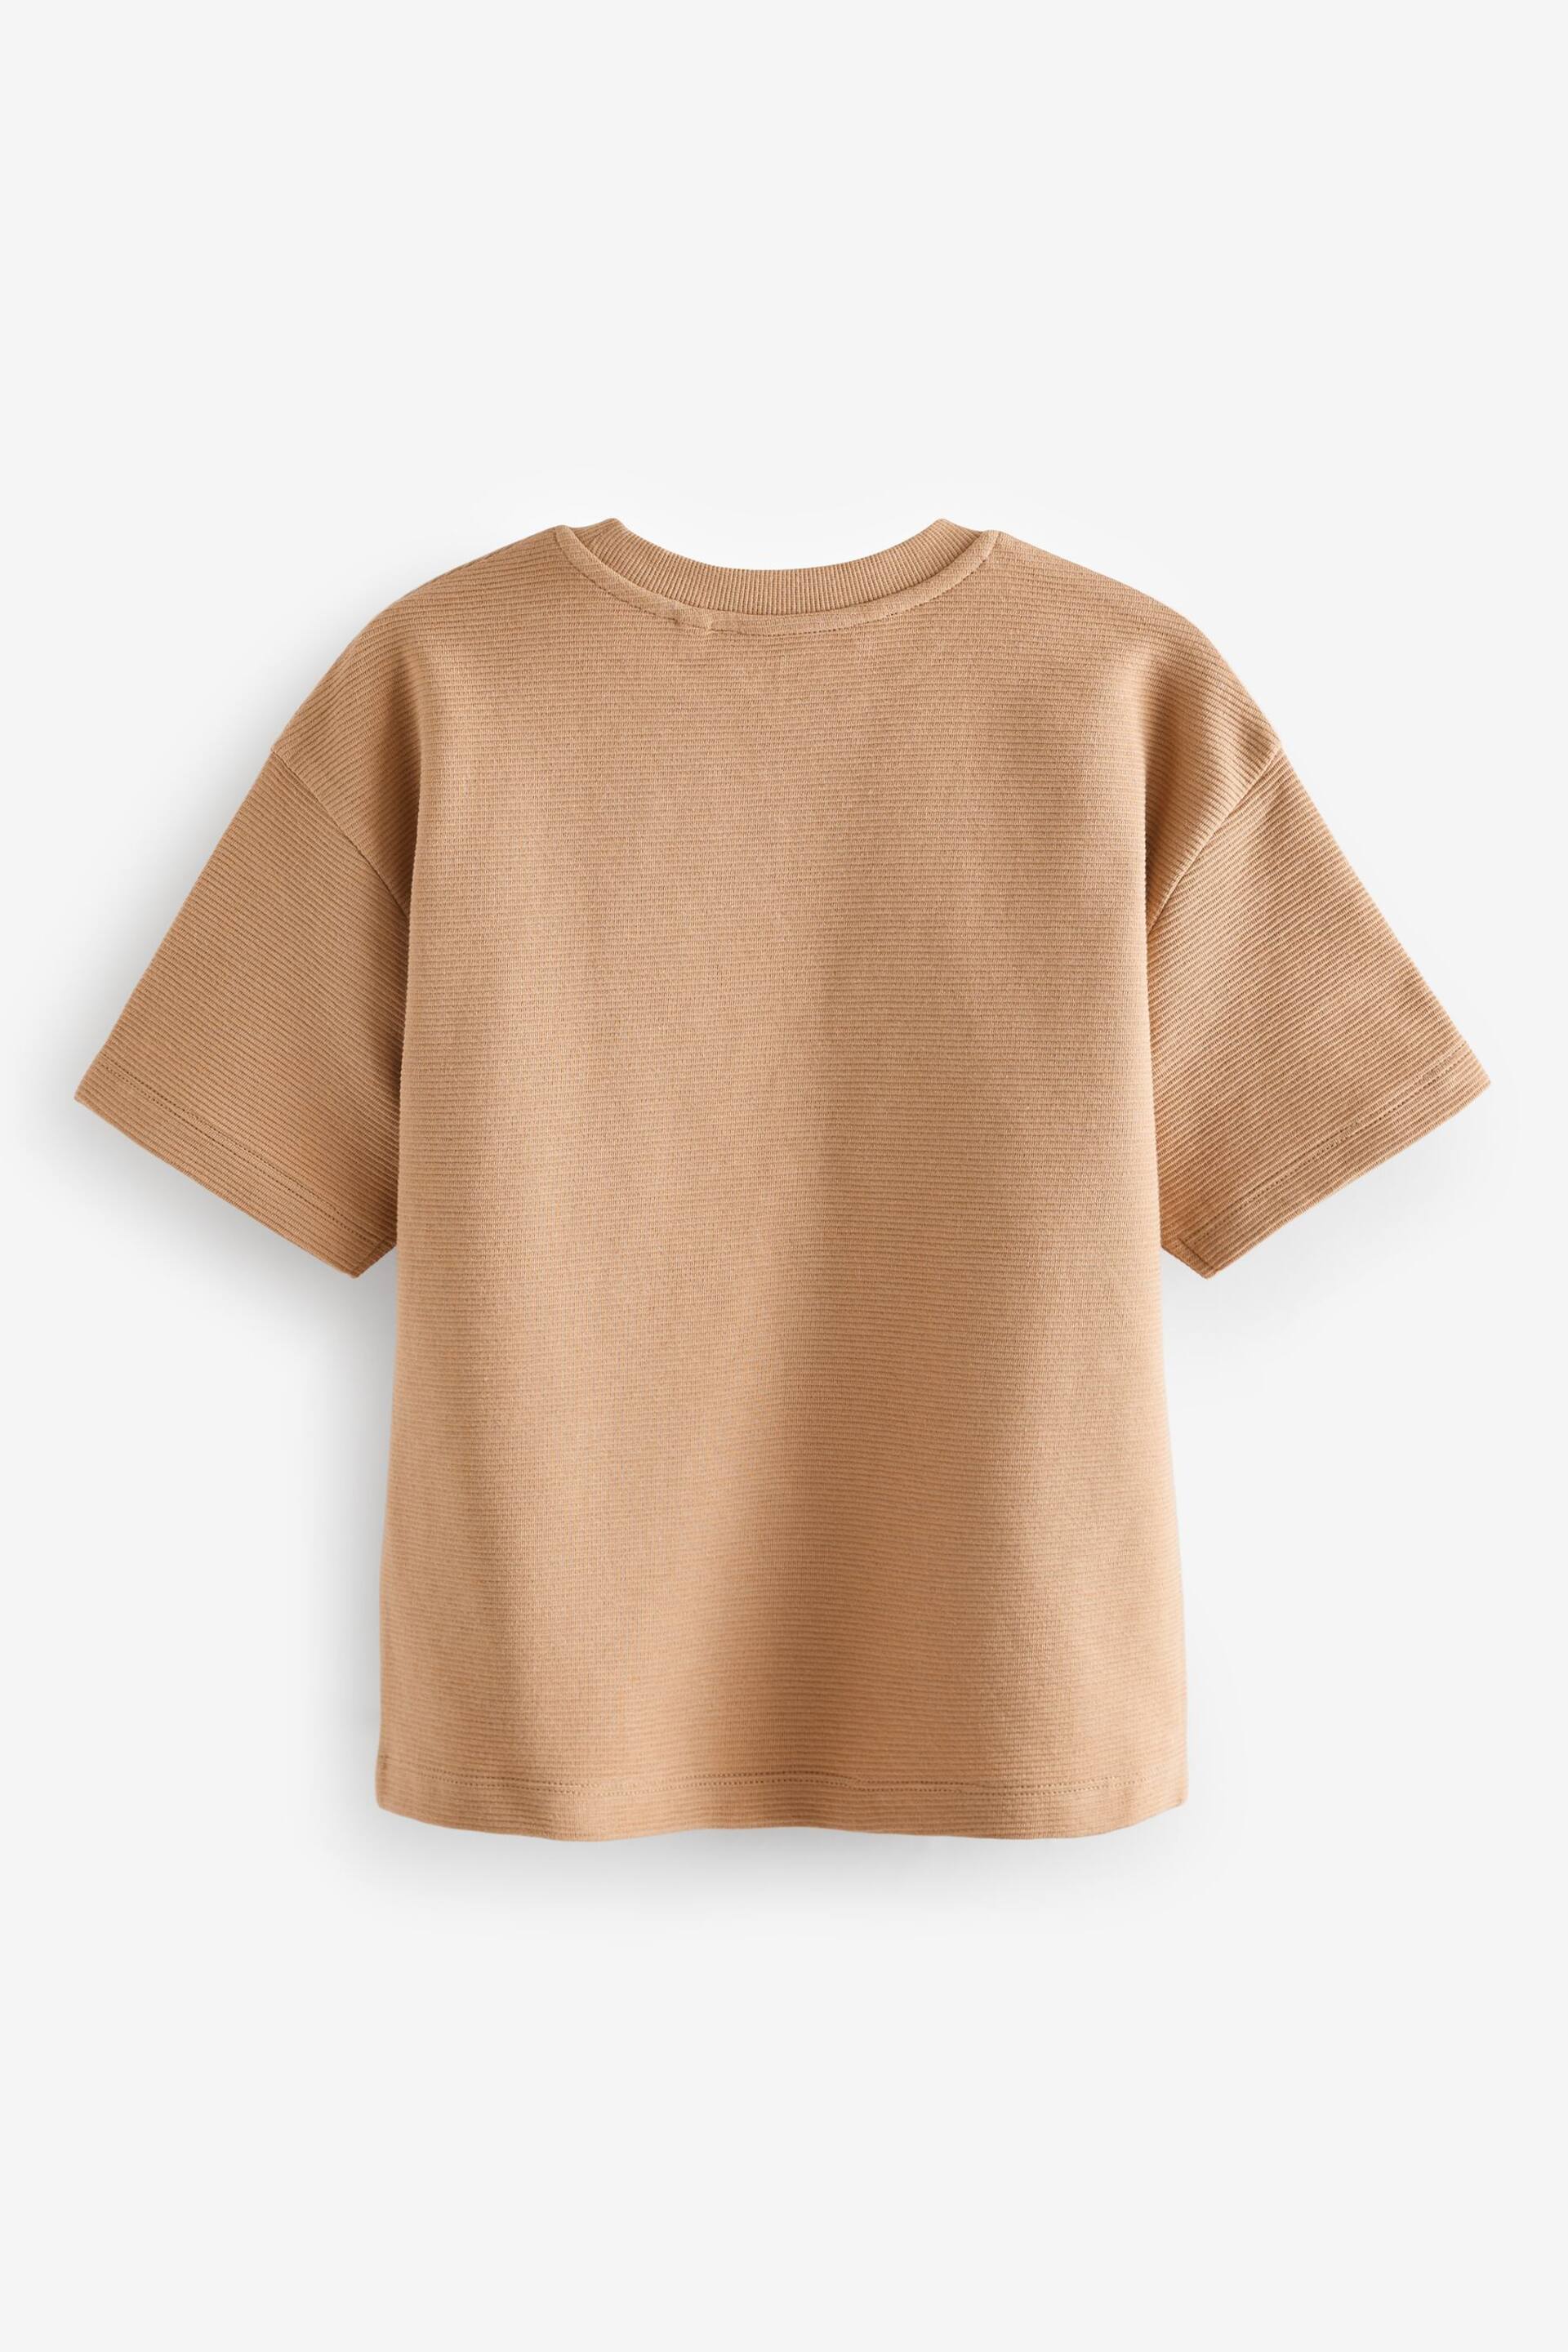 Blue/Tan Brown Oversized T-Shirts 3 Pack (3-16yrs) - Image 3 of 3